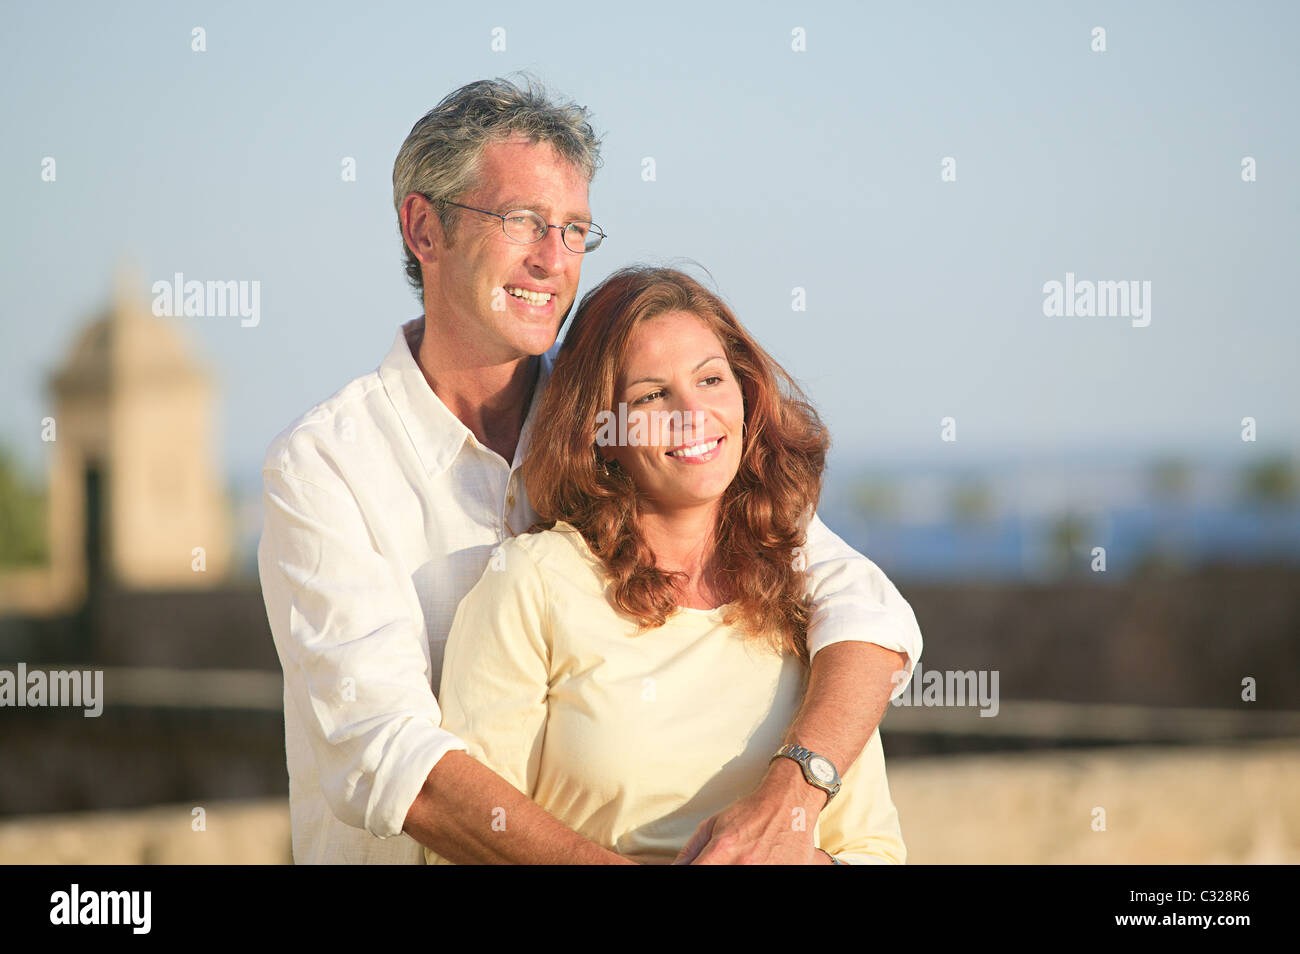 Mature couple outdoors, man with arms around woman Stock Photo